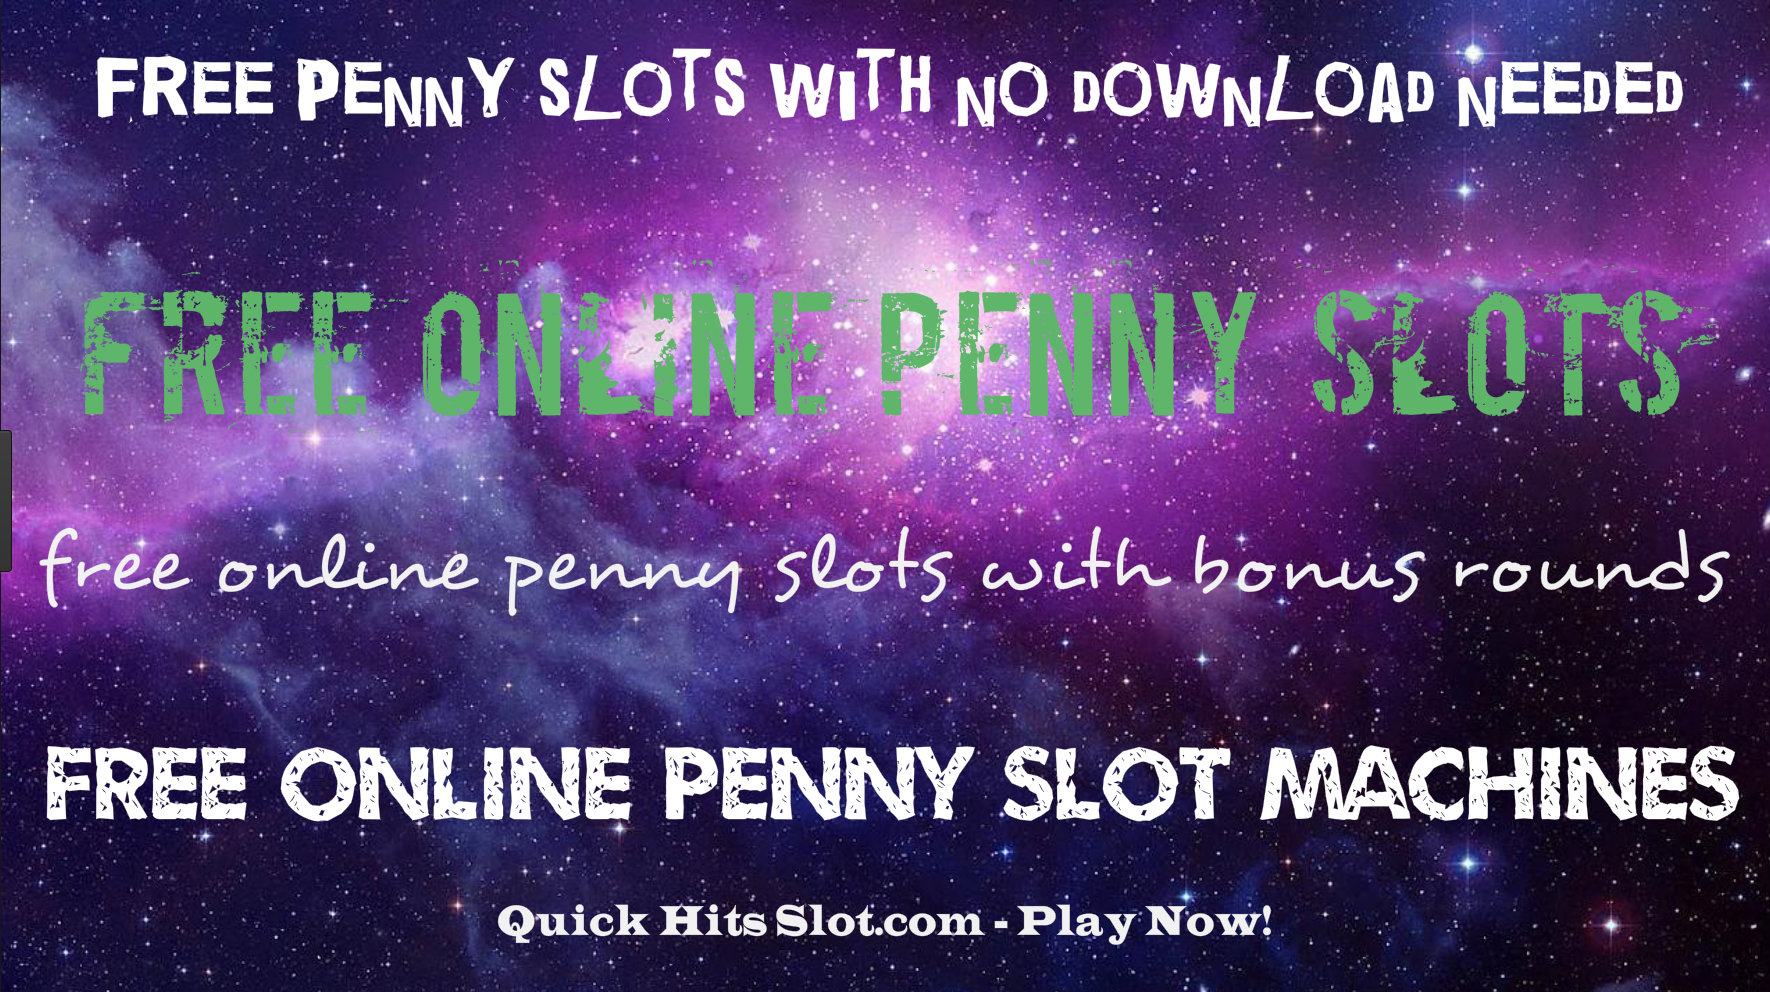 Free penny slots no download needed download nextnow